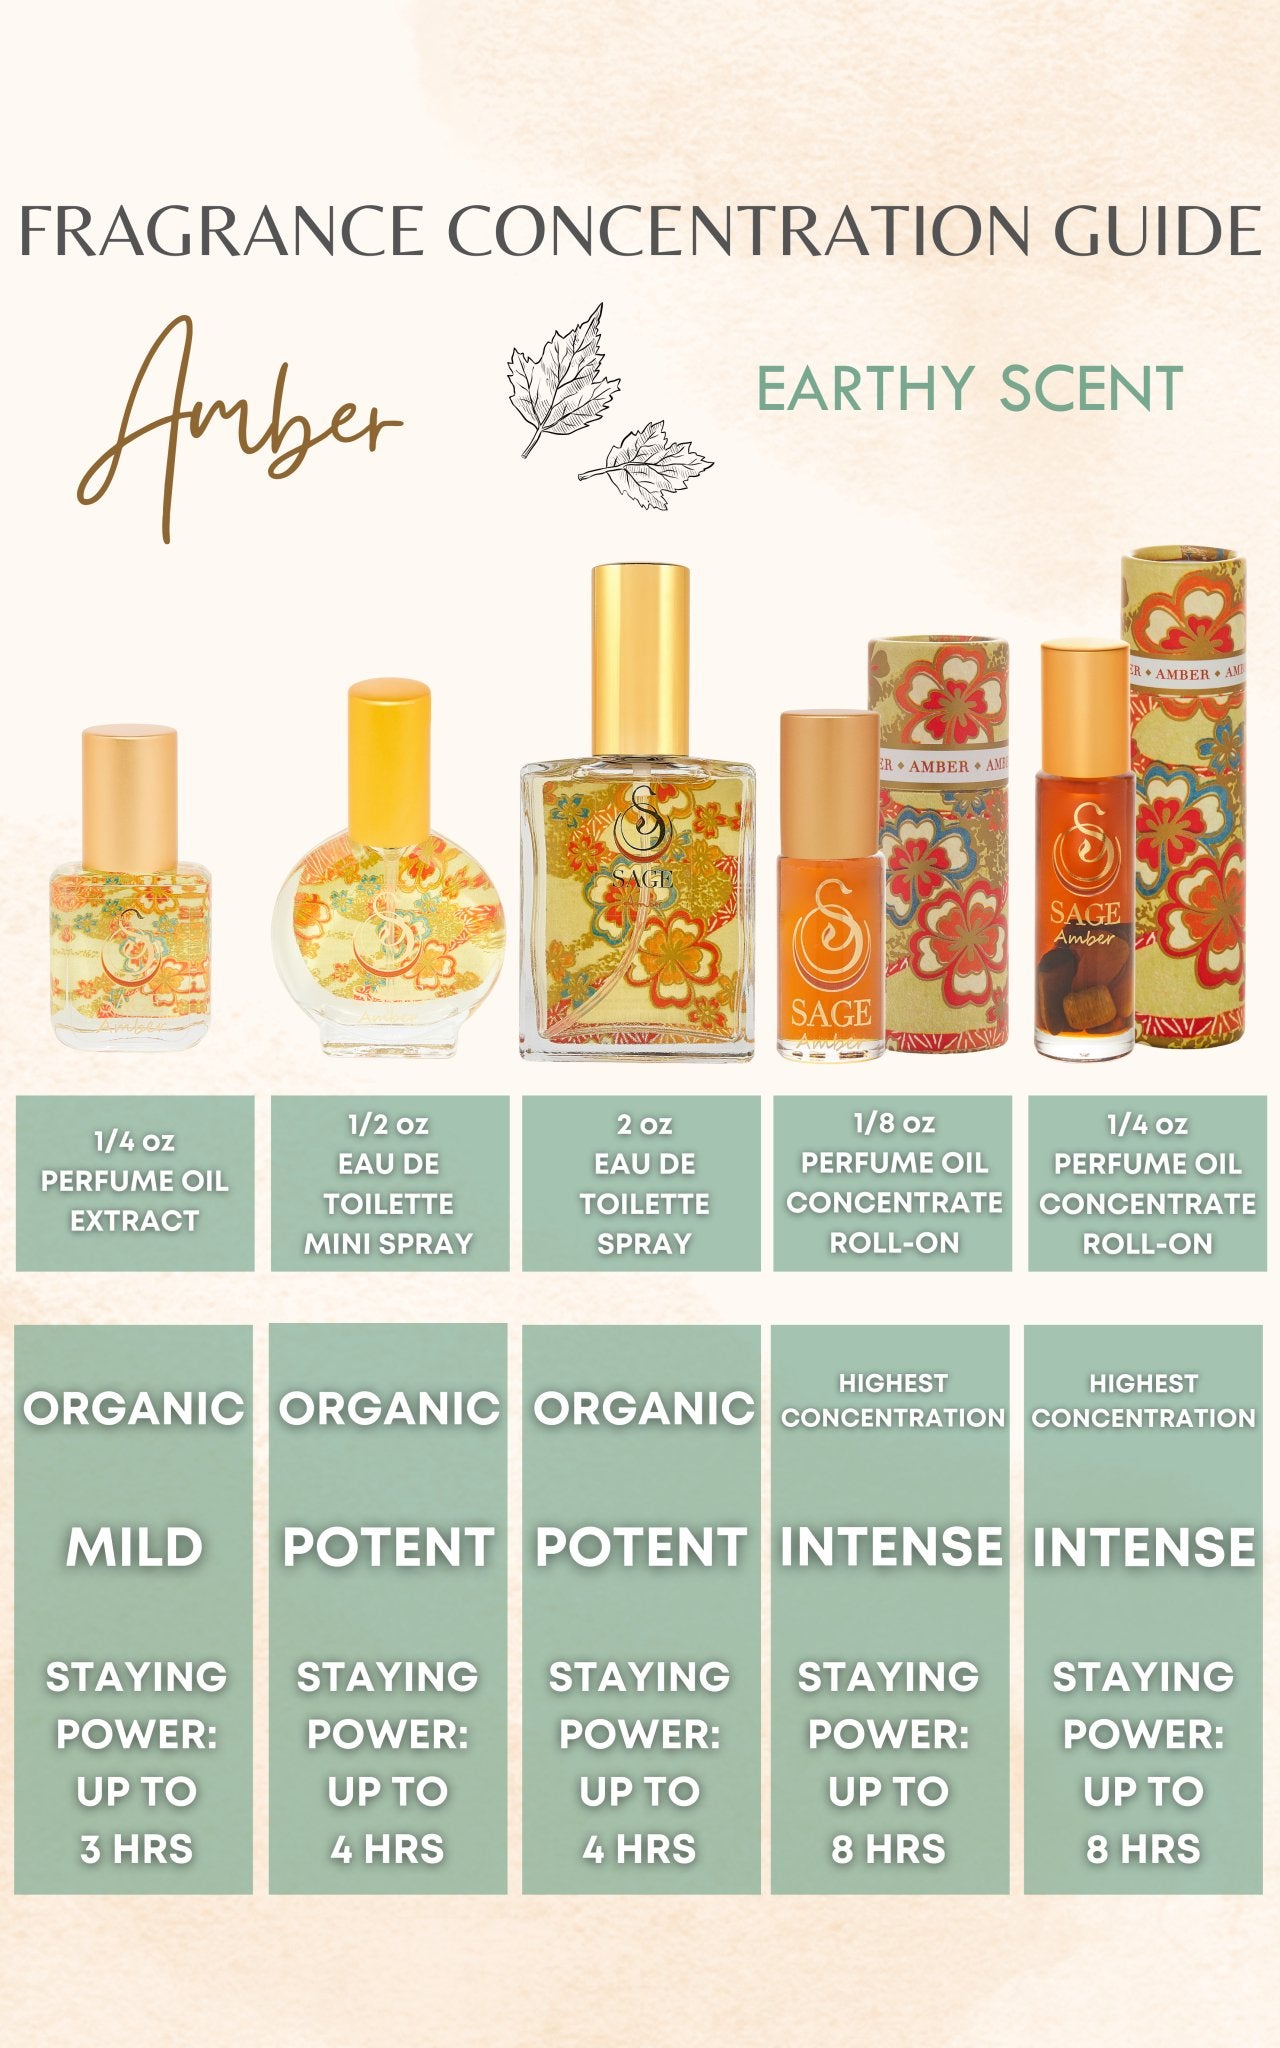 INDULGE ~ AMBER Perfume Oil Concentrate Roll-On and Organic Eau de Toilette Gift Set by Sage - The Sage Lifestyle